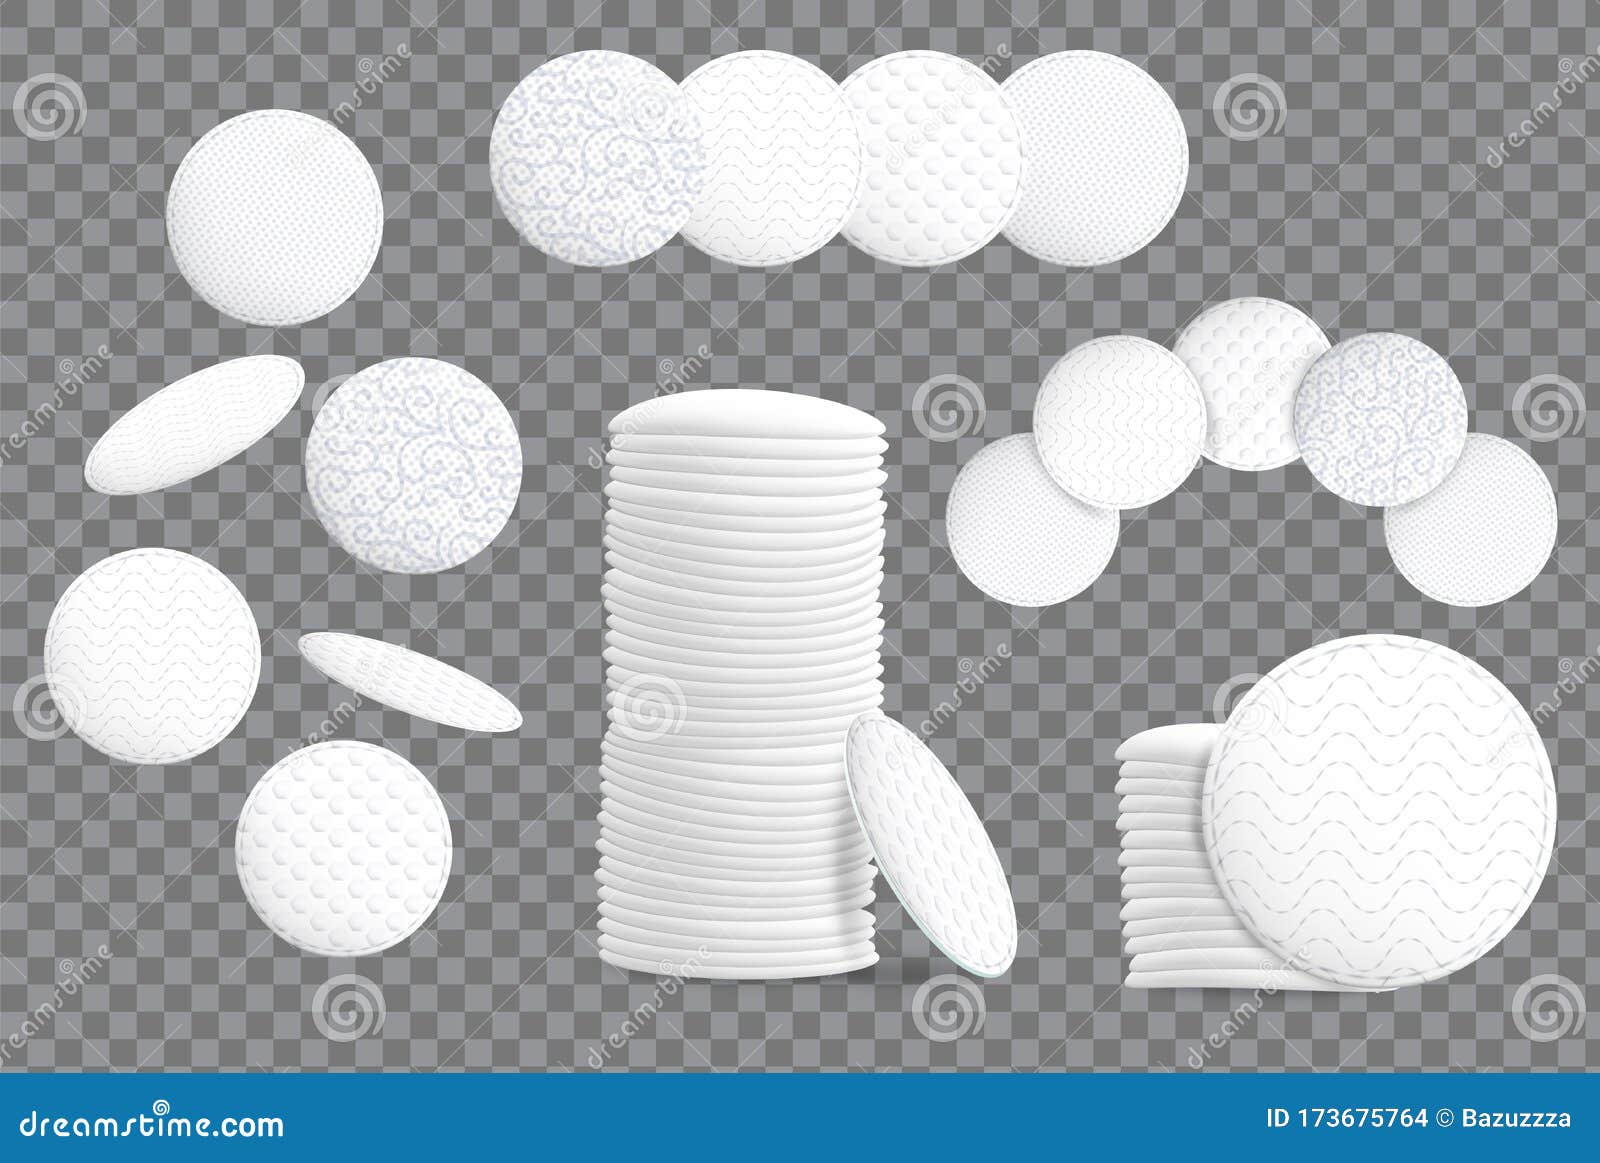 Download Cosmetic Cotton Pads Mockup Set, Vector Isolated ...